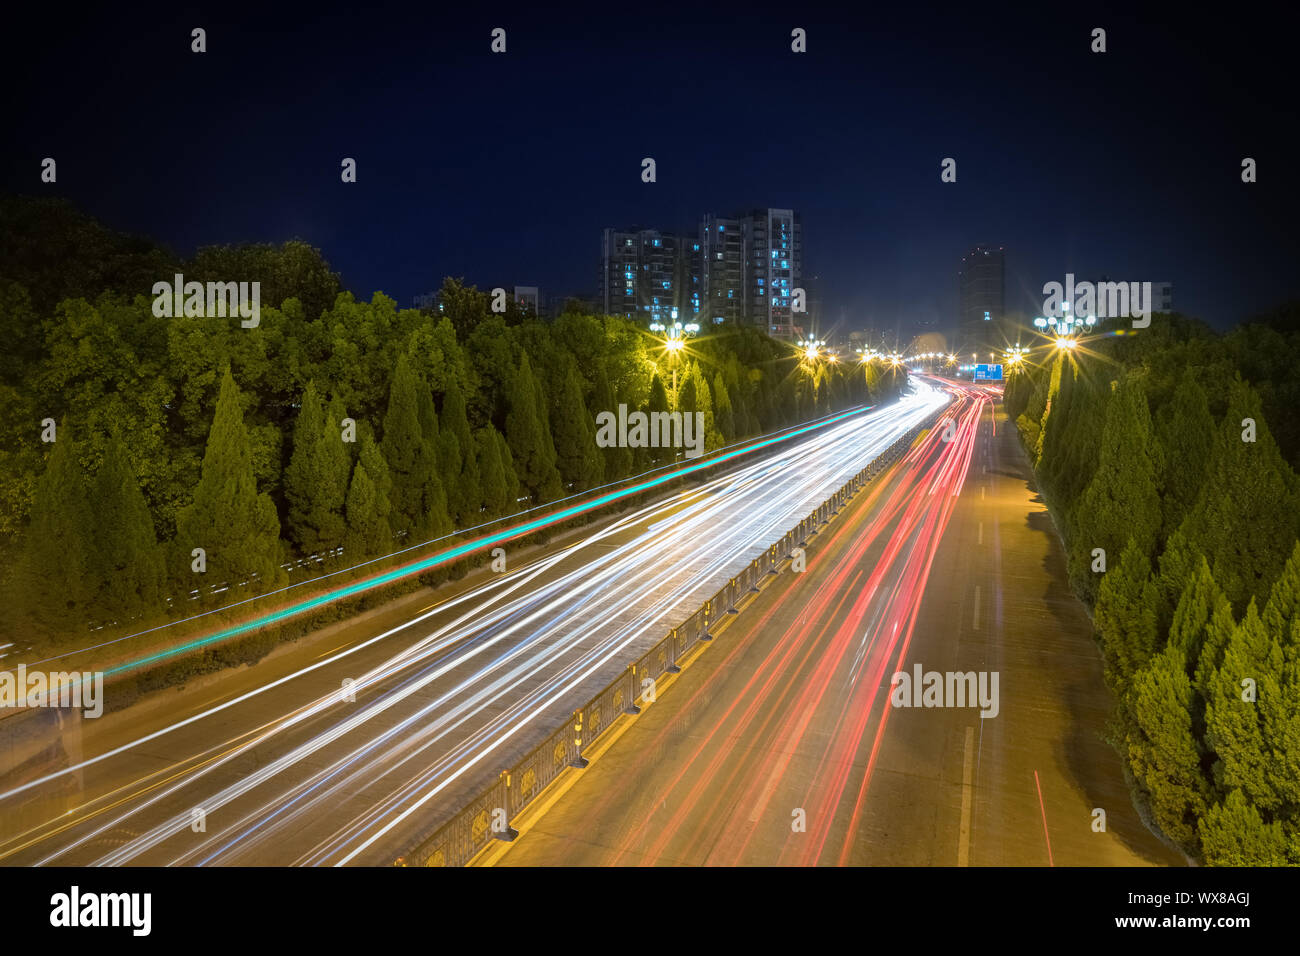 light trails on city road Stock Photo